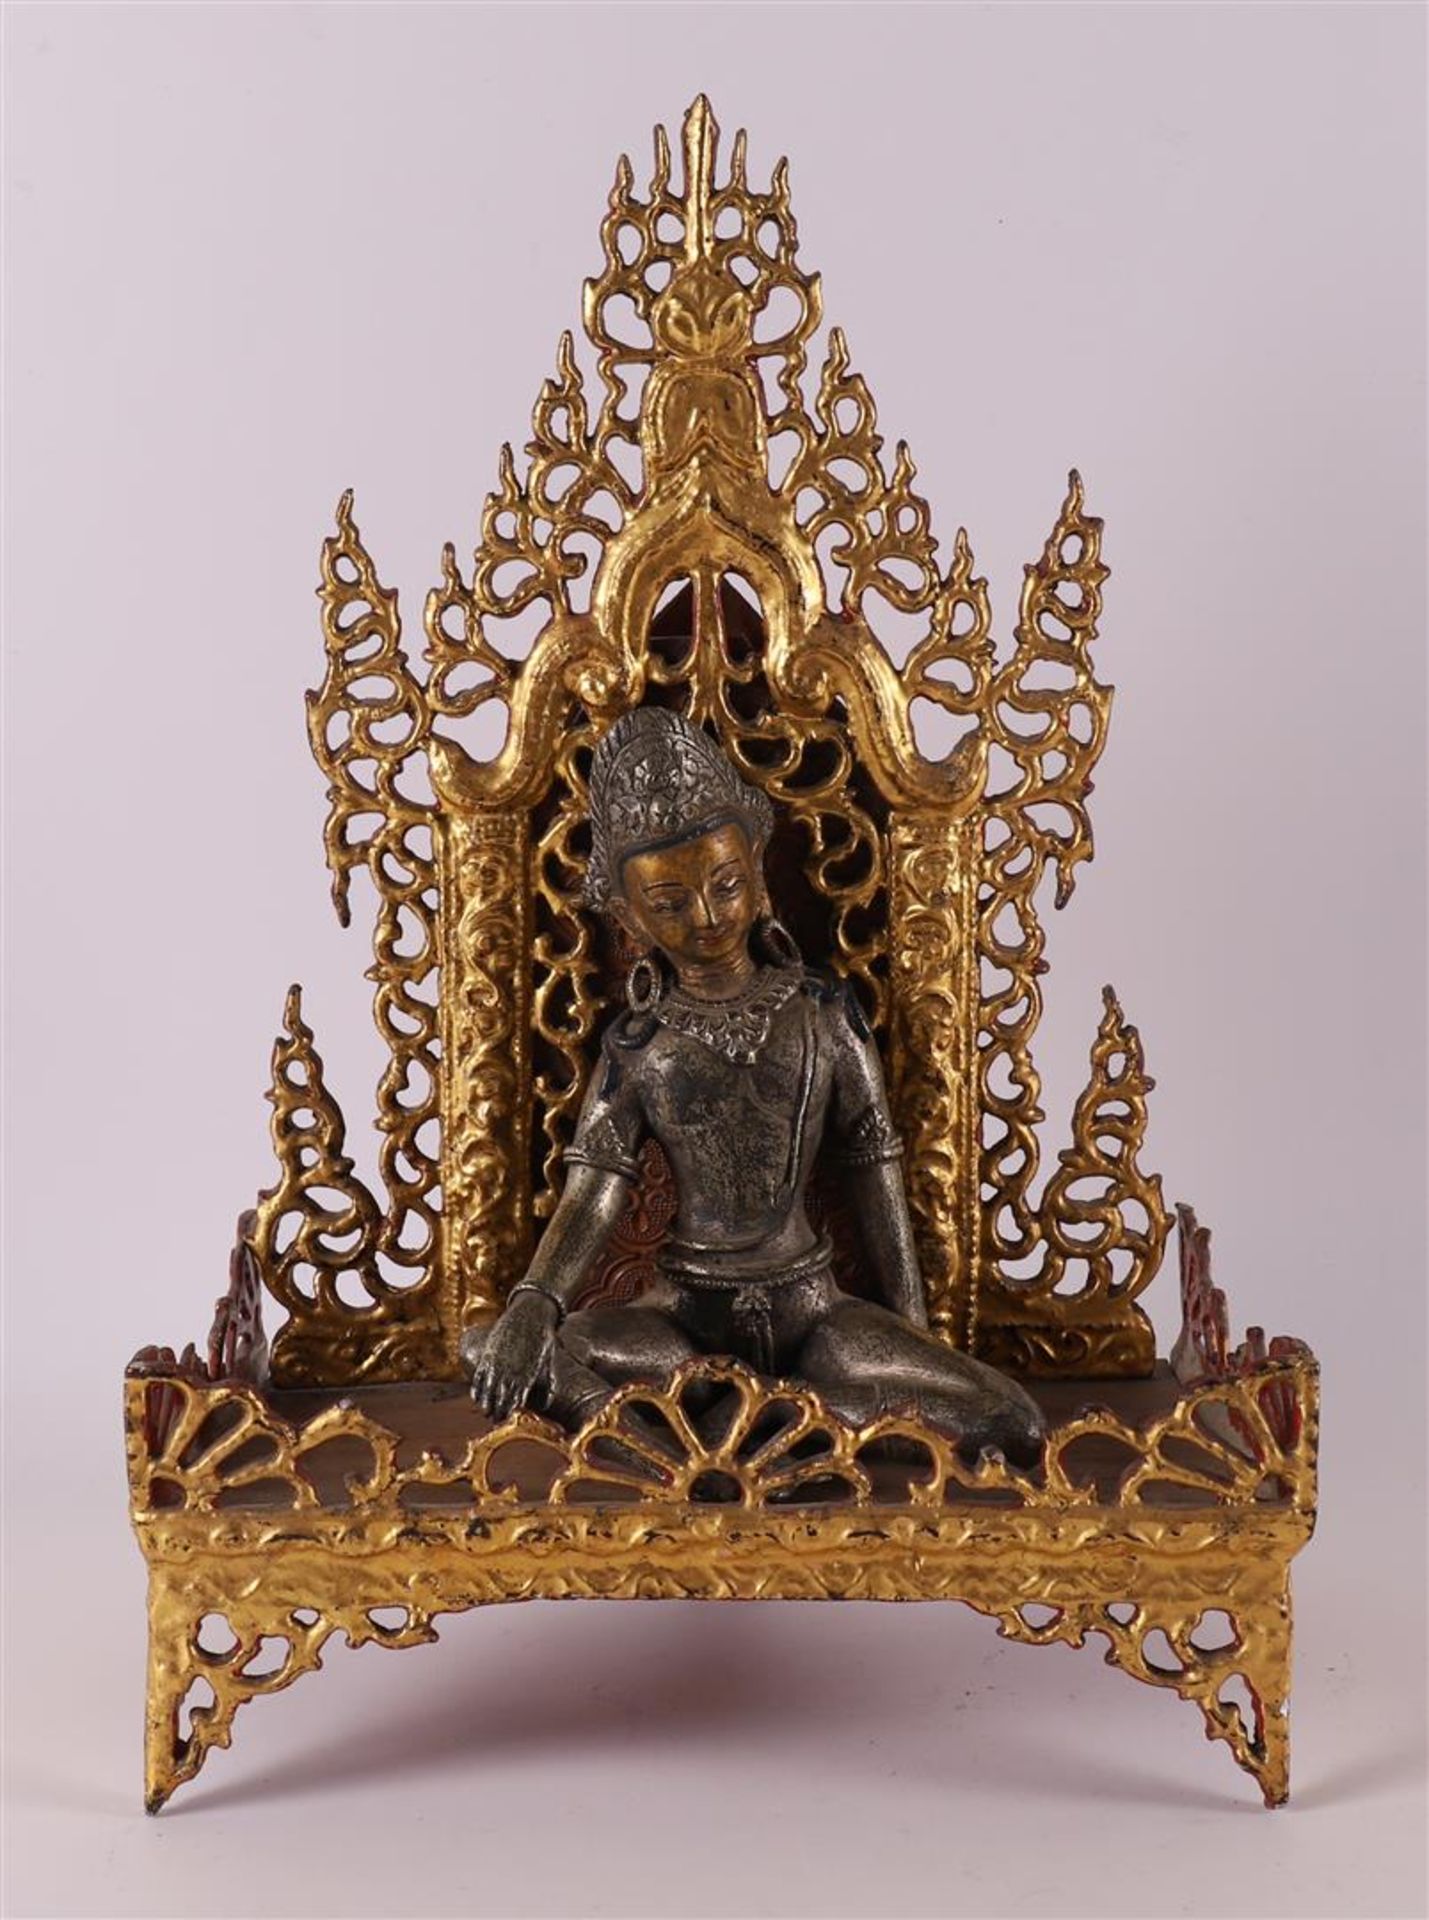 A silver-plated bronze Buddha on a loose gilded throne, India, 19th/20th century